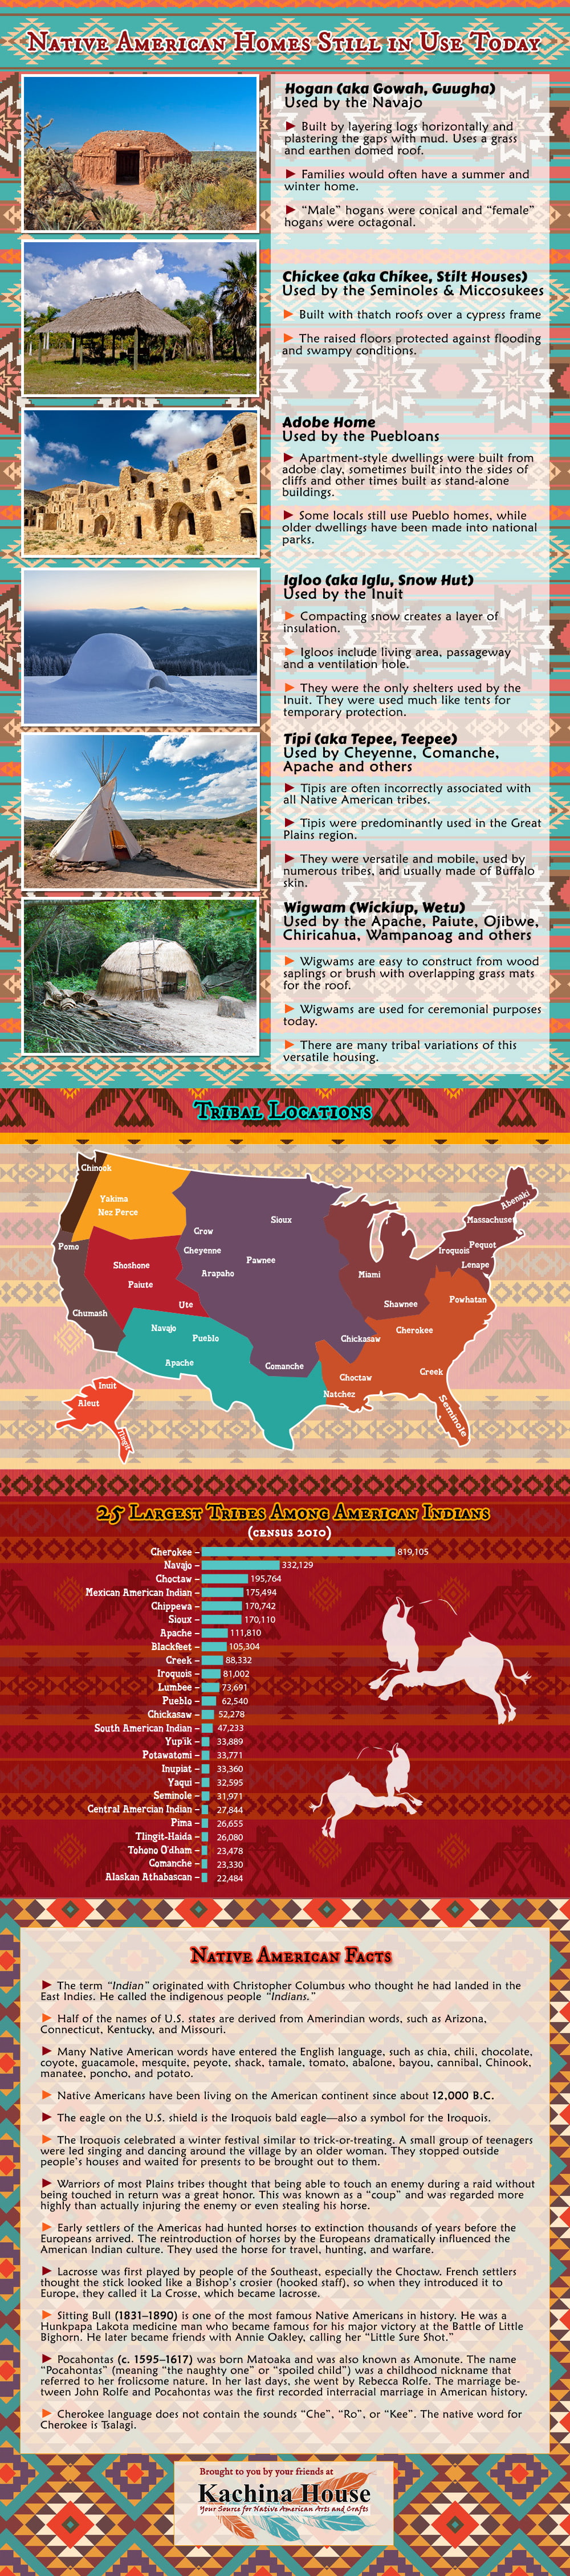 Native American Homes Infographic